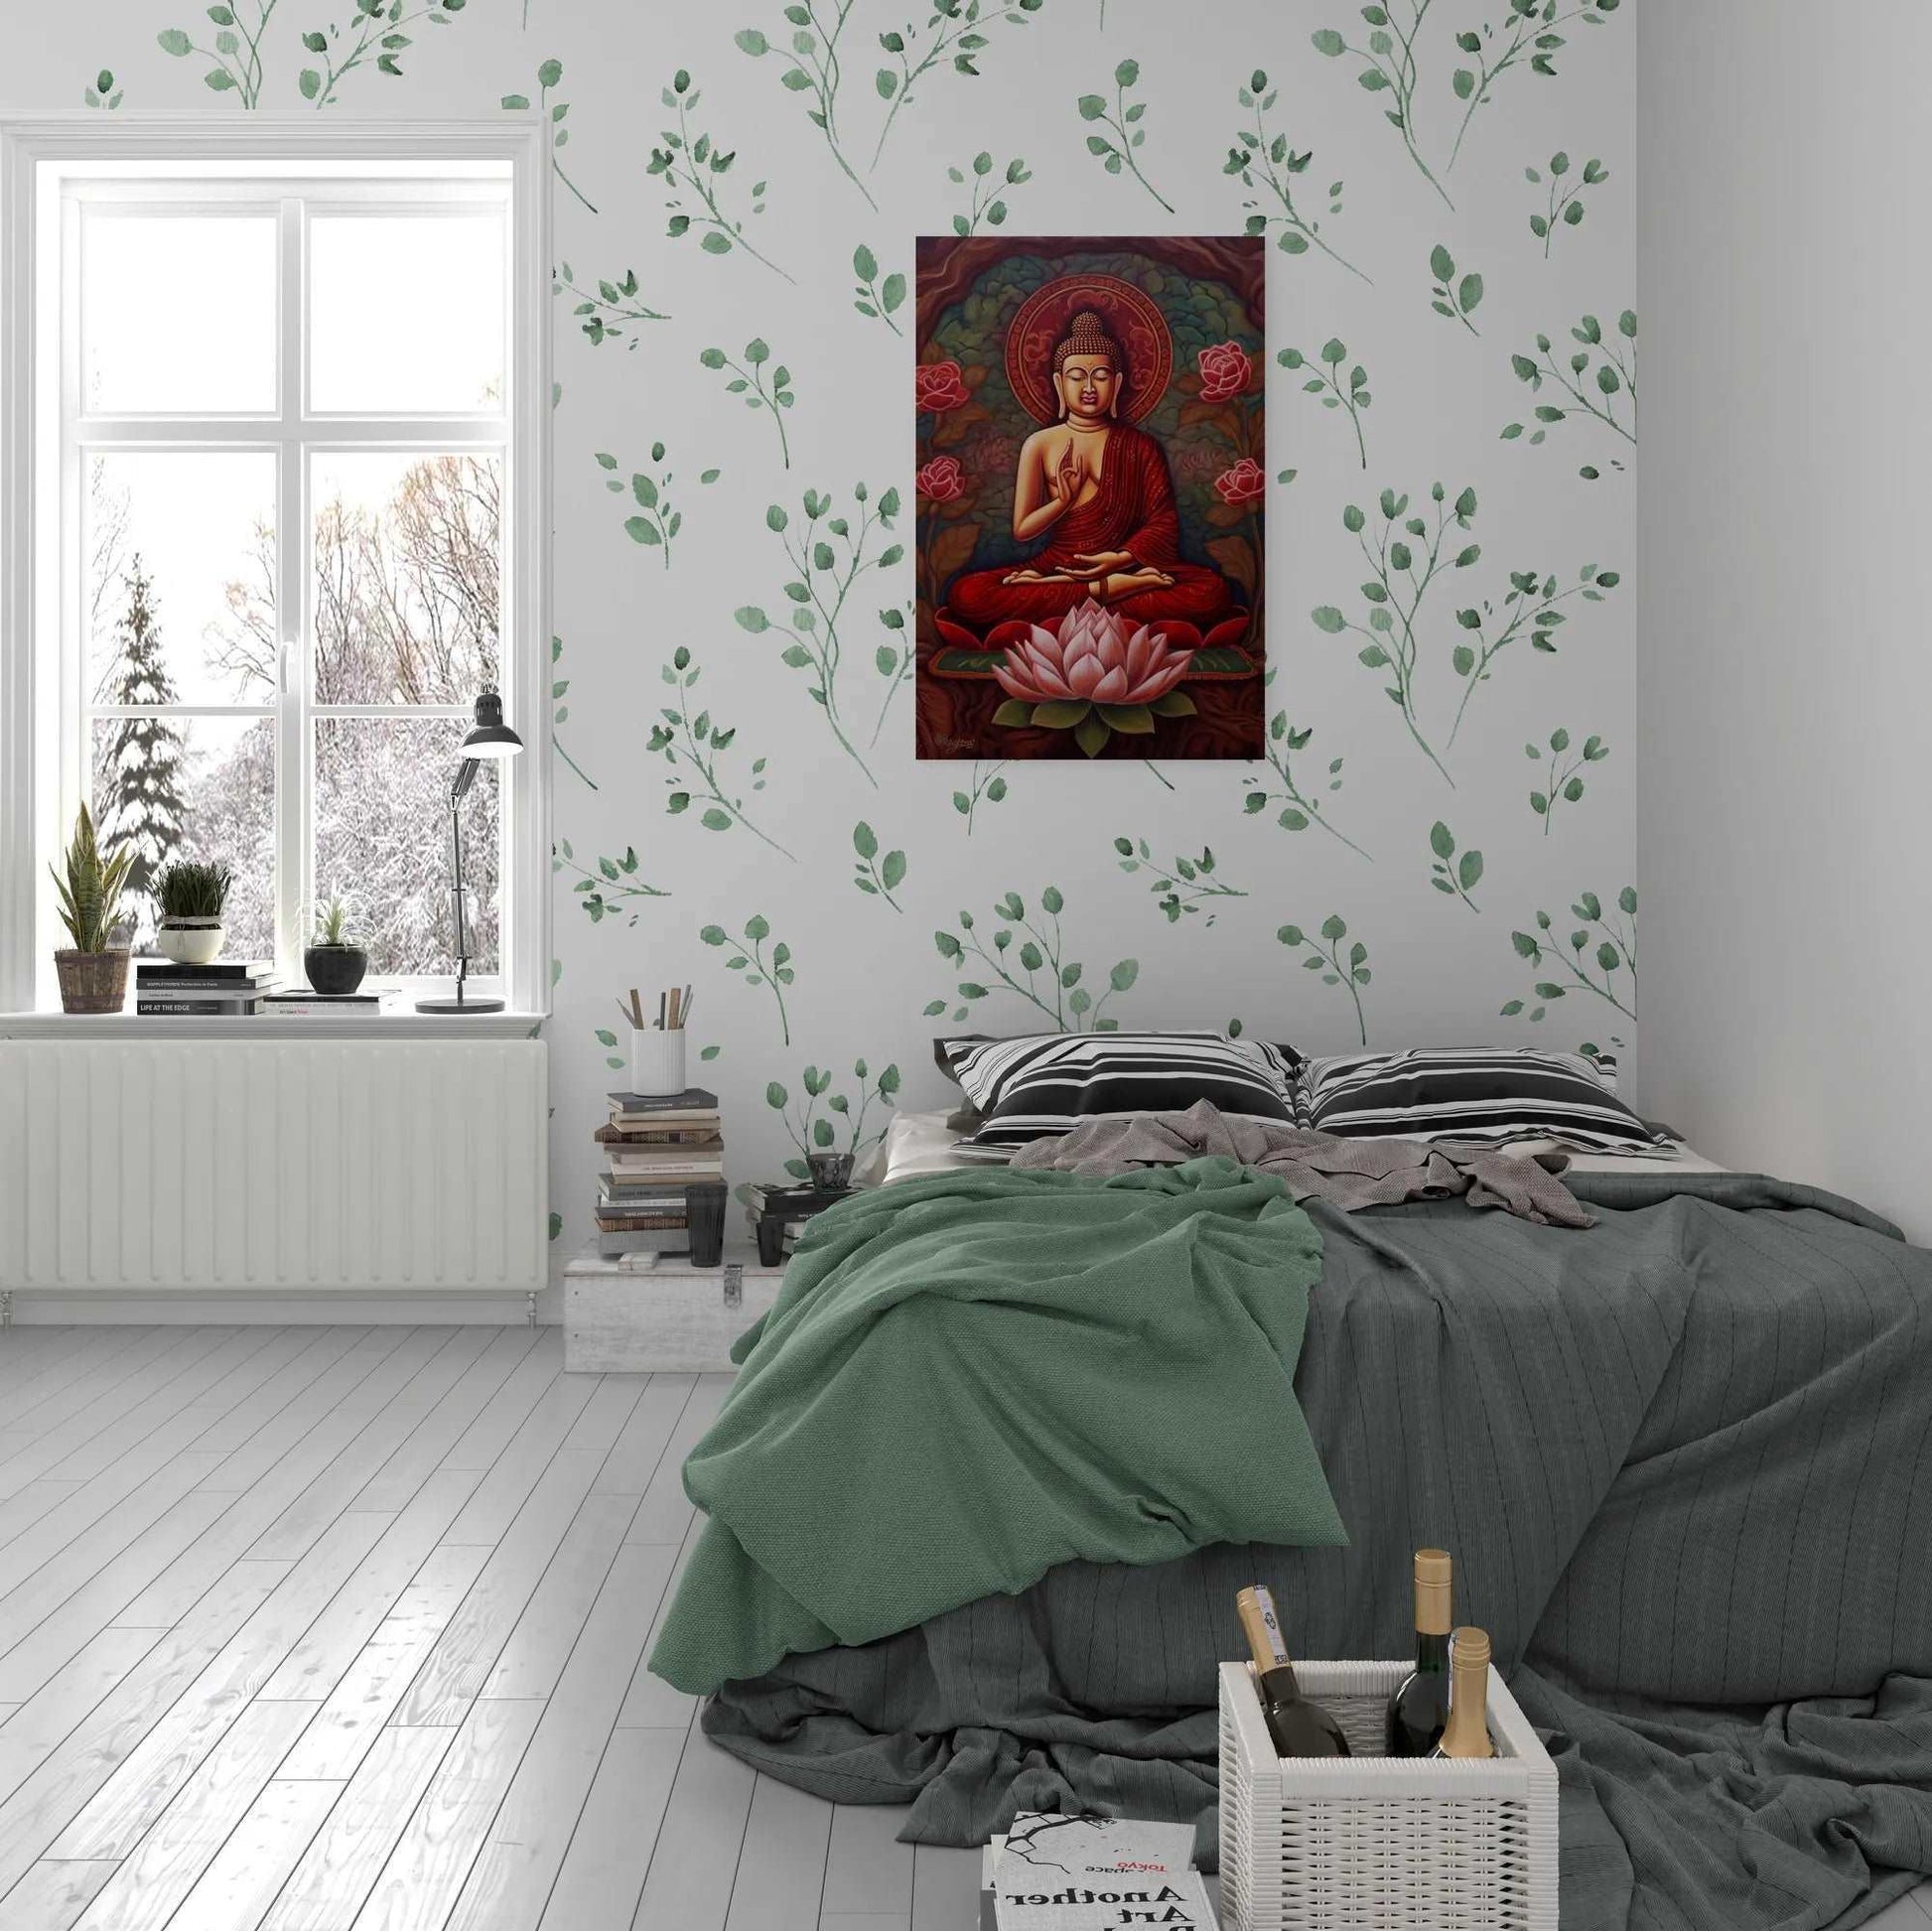 Red and gold seated Buddha painting with a prominent lotus, adding a touch of serenity to a bedroom with leaf-patterned wallpaper, snowy outside view, and soft bedding.